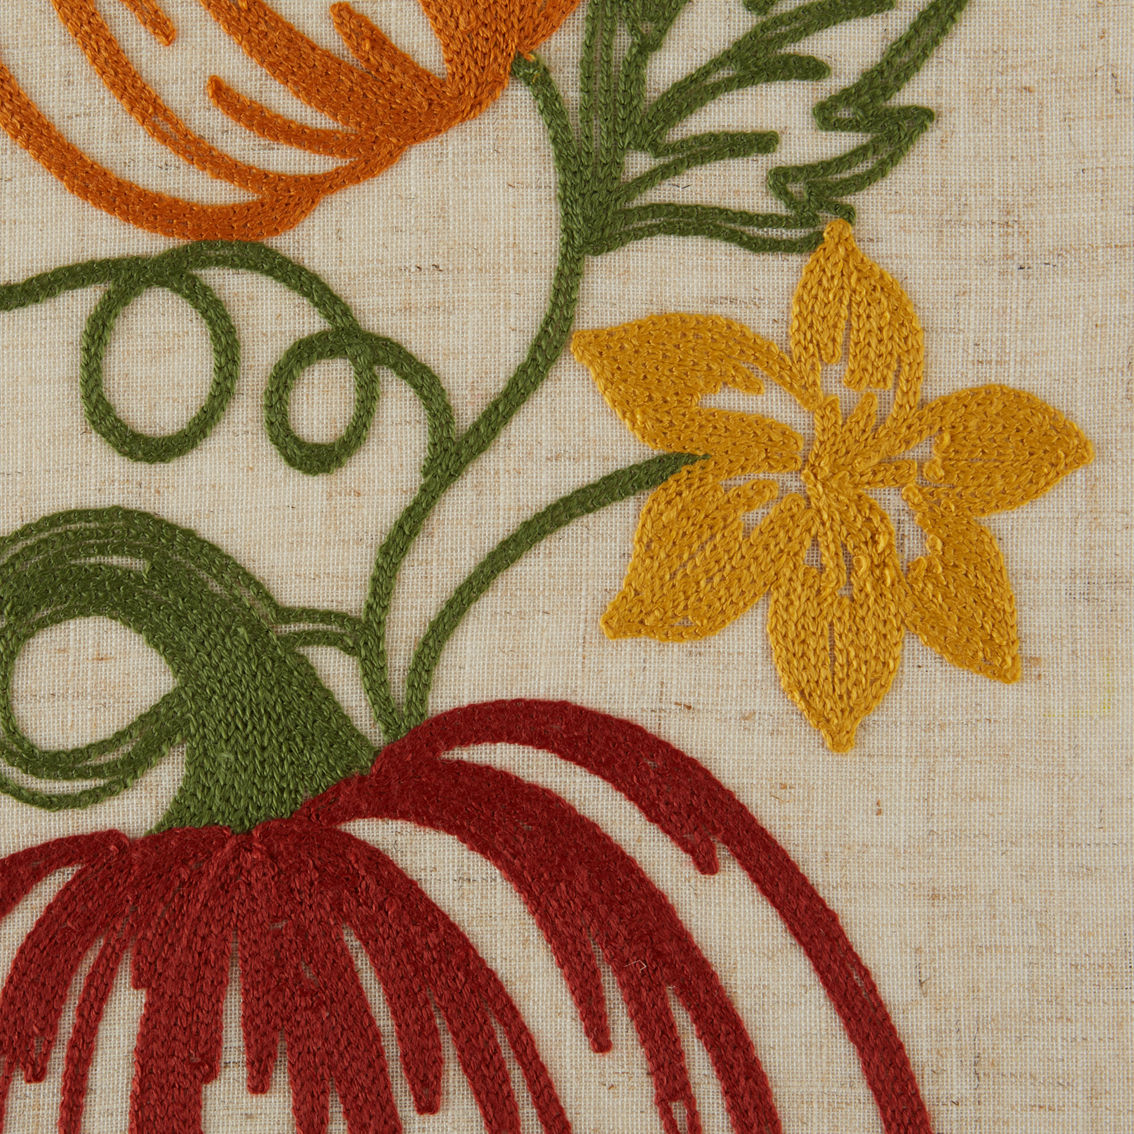 Design Imports 14 x 70 in. Pumpkin Vine Embroidered Table Runner - Image 8 of 8